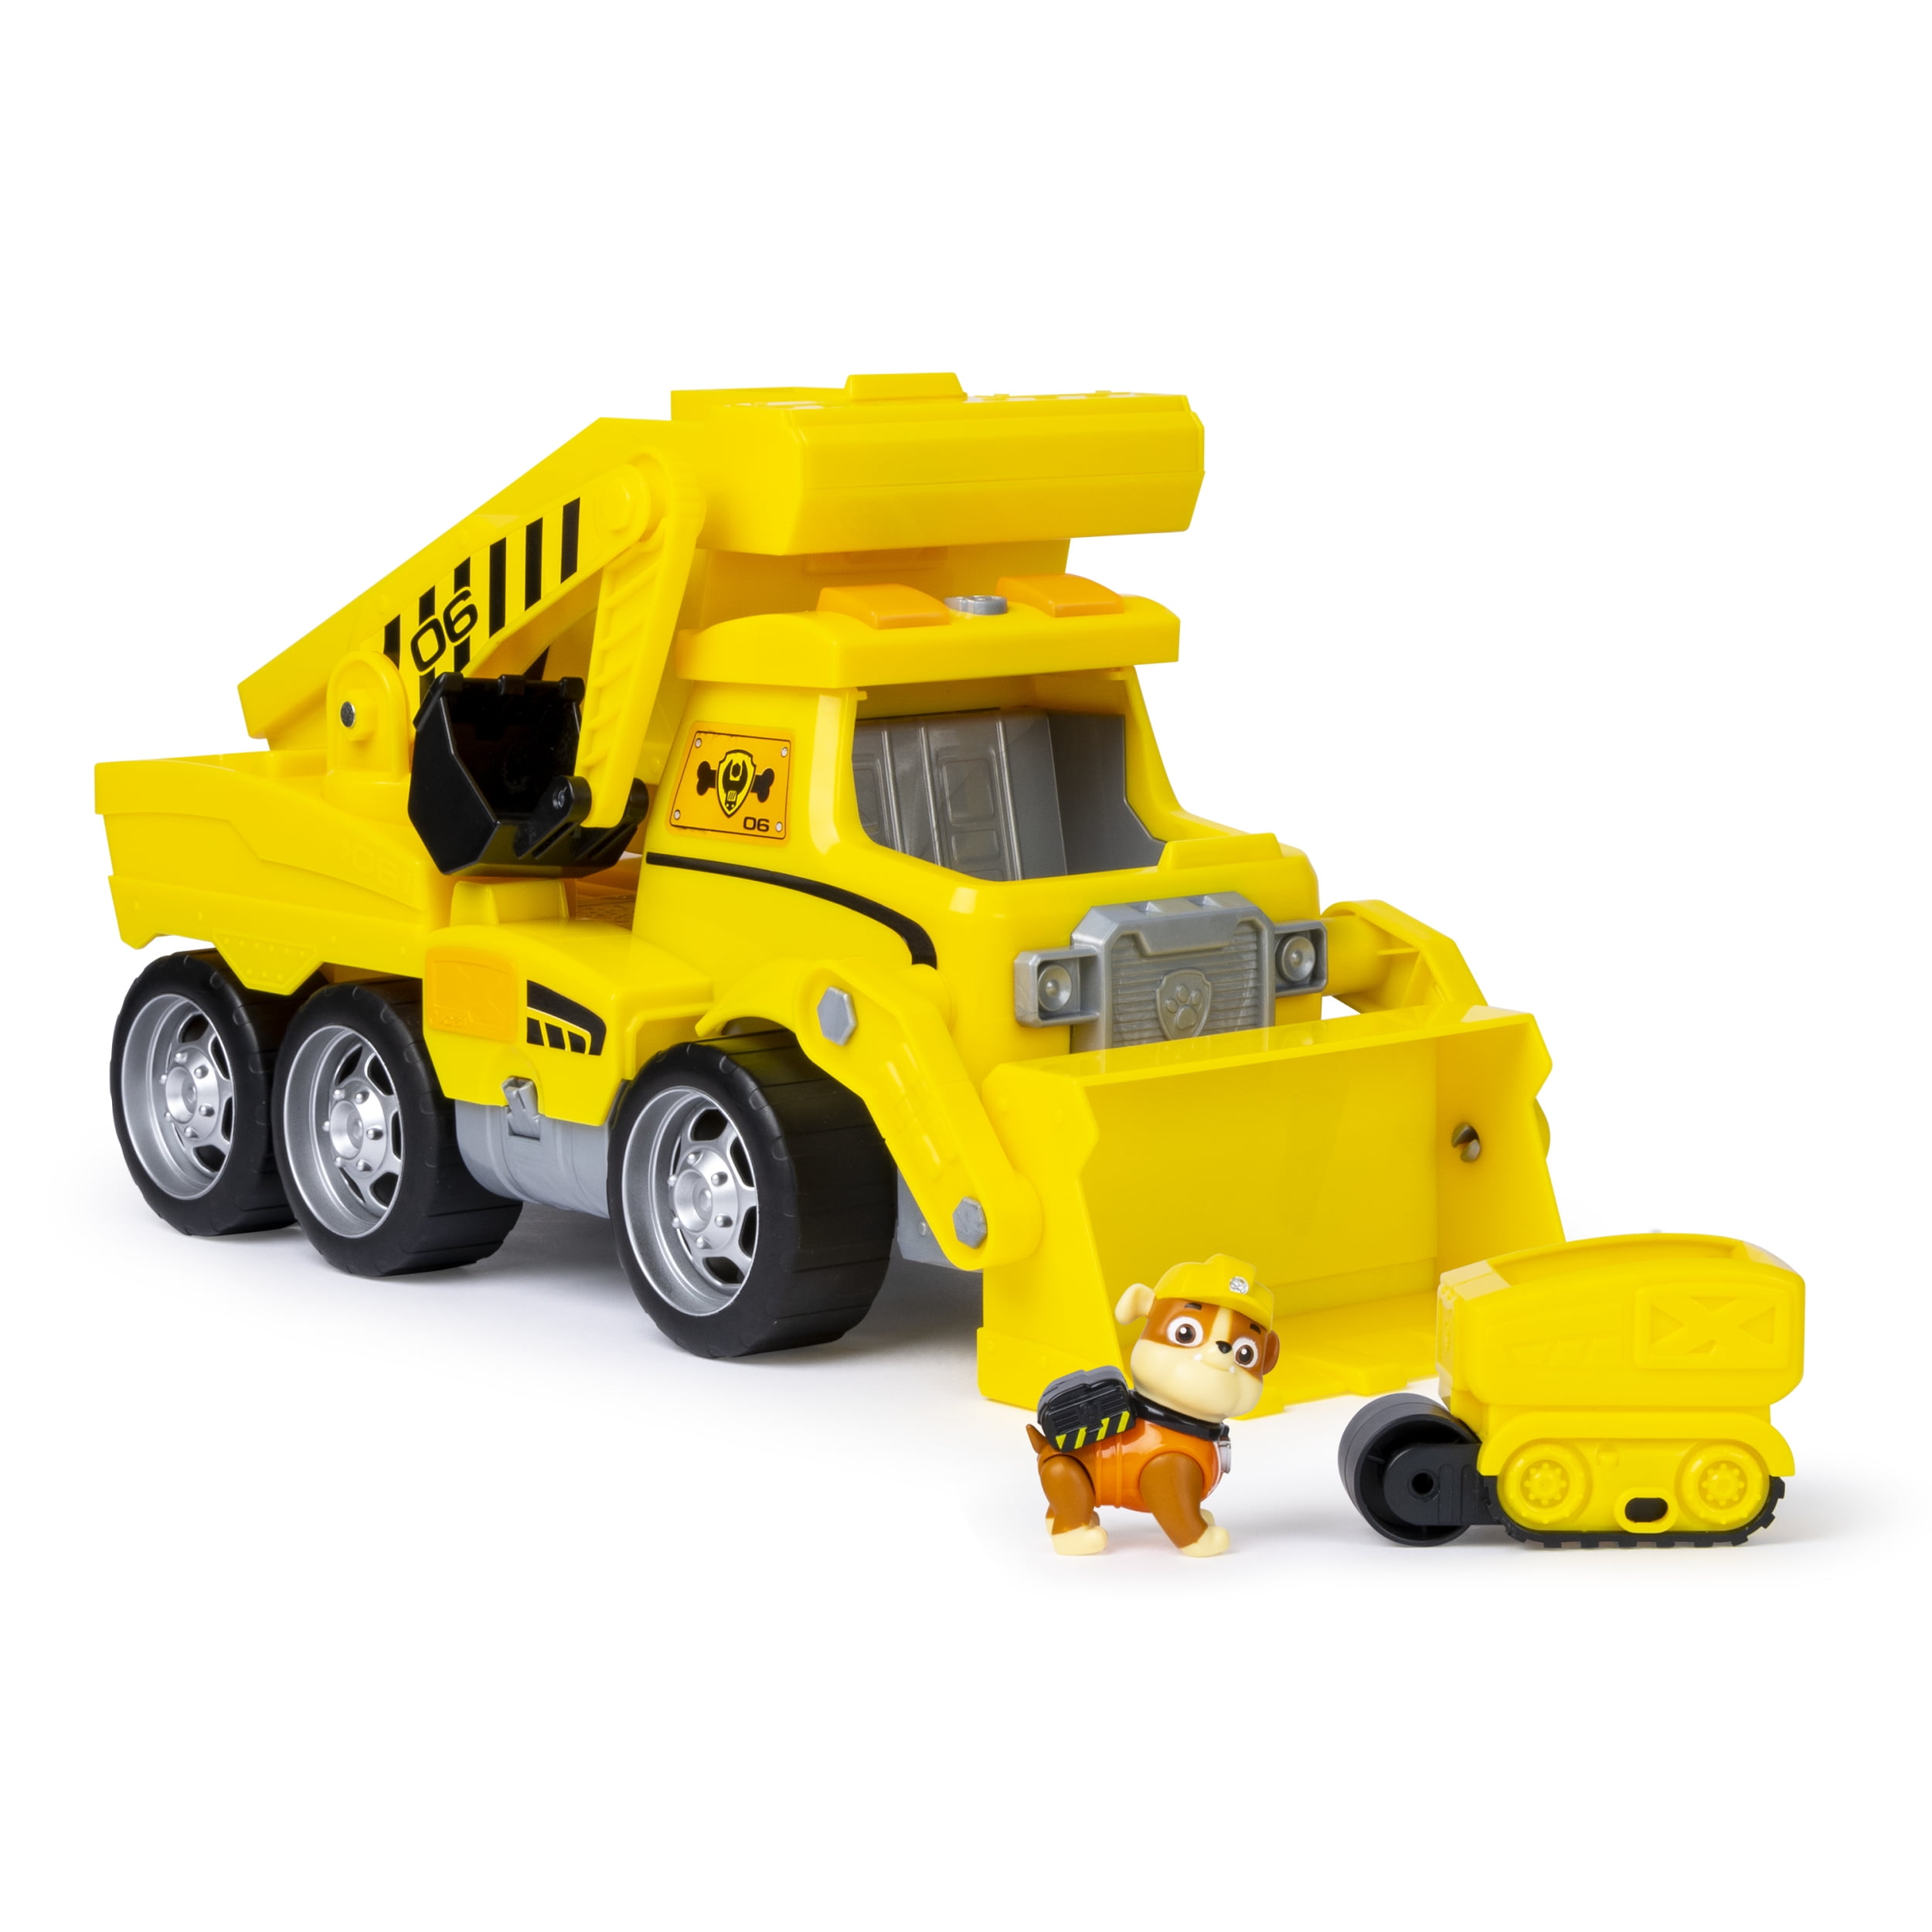 PAW Patrol, Rescue Construction Truck with Lights, Sound and Mini Vehicle, for Ages 3 Up - Walmart.com